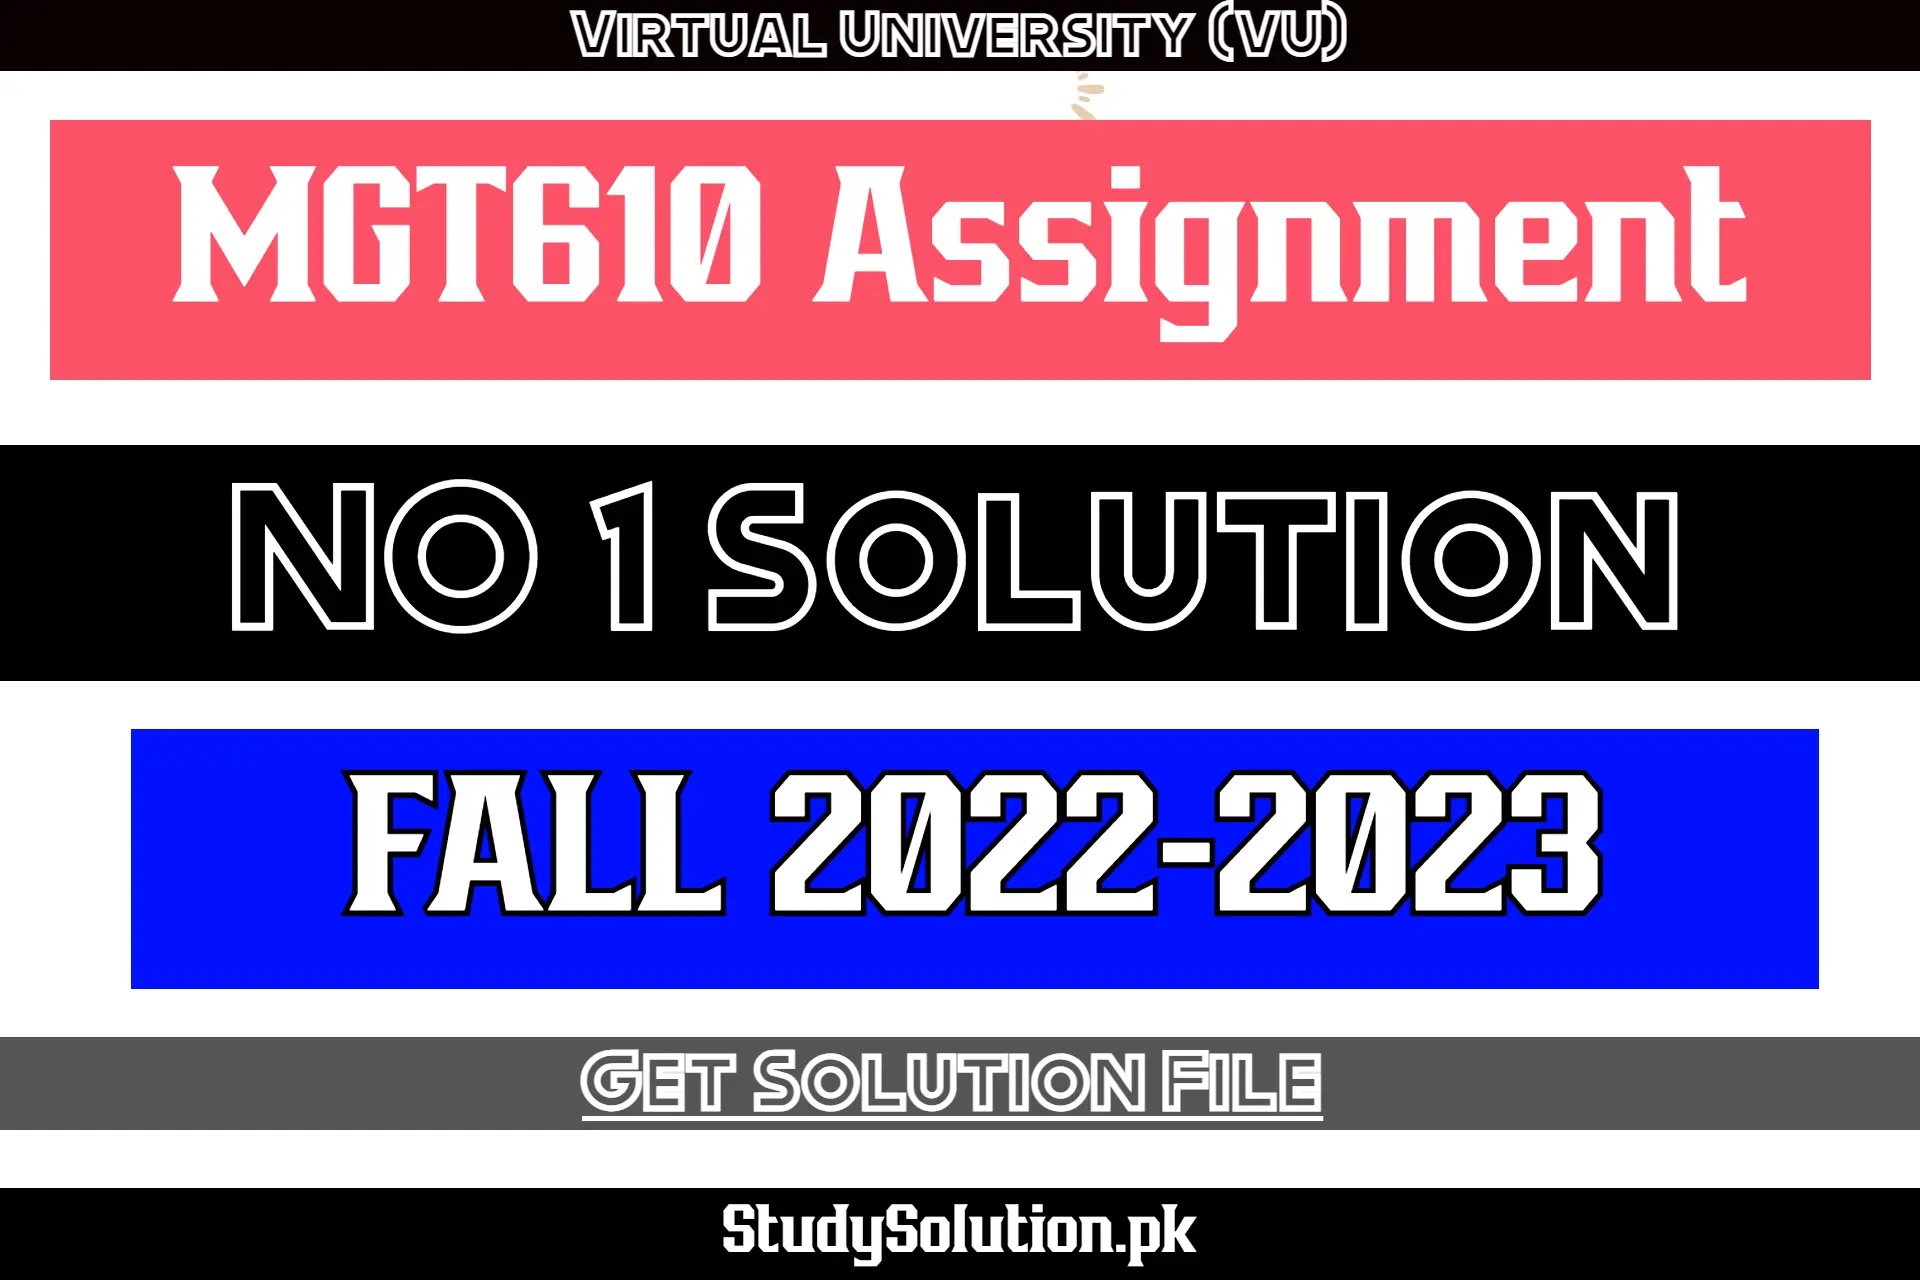 MGT610 Assignment No 1 Solution Fall 2022